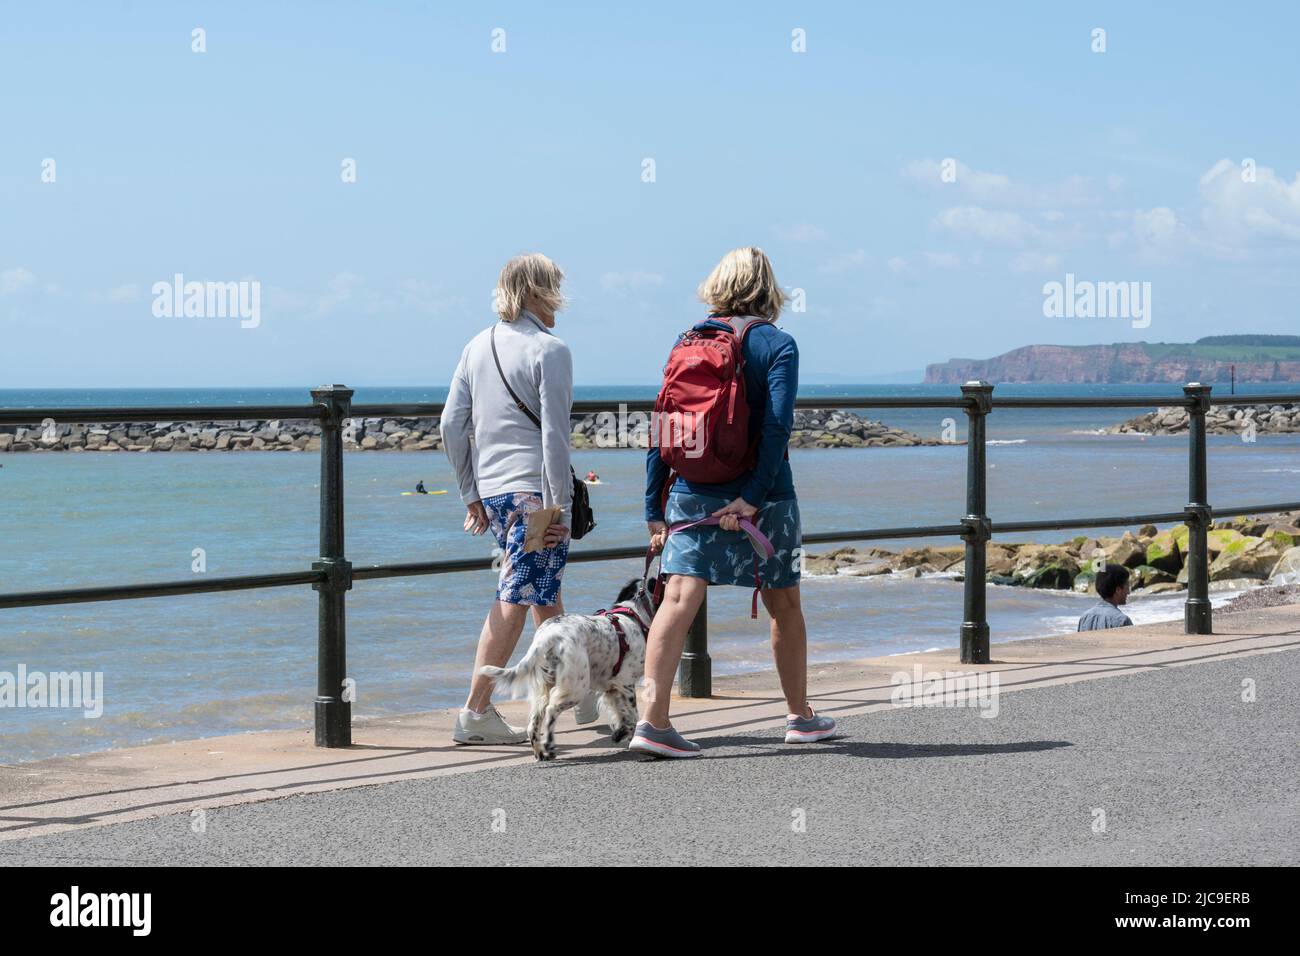 Sidmouth, East Devon, UK. 11th June, 2022. UK Weather: Warm sunny spells and a brisk breeze at the seaside town of Sidmouth this afternoon. Holidaymakers and locals visited the pretty regency town to enjoy a stroll along the esplanade. Credit: Celia McMahon/Alamy Live News Stock Photo